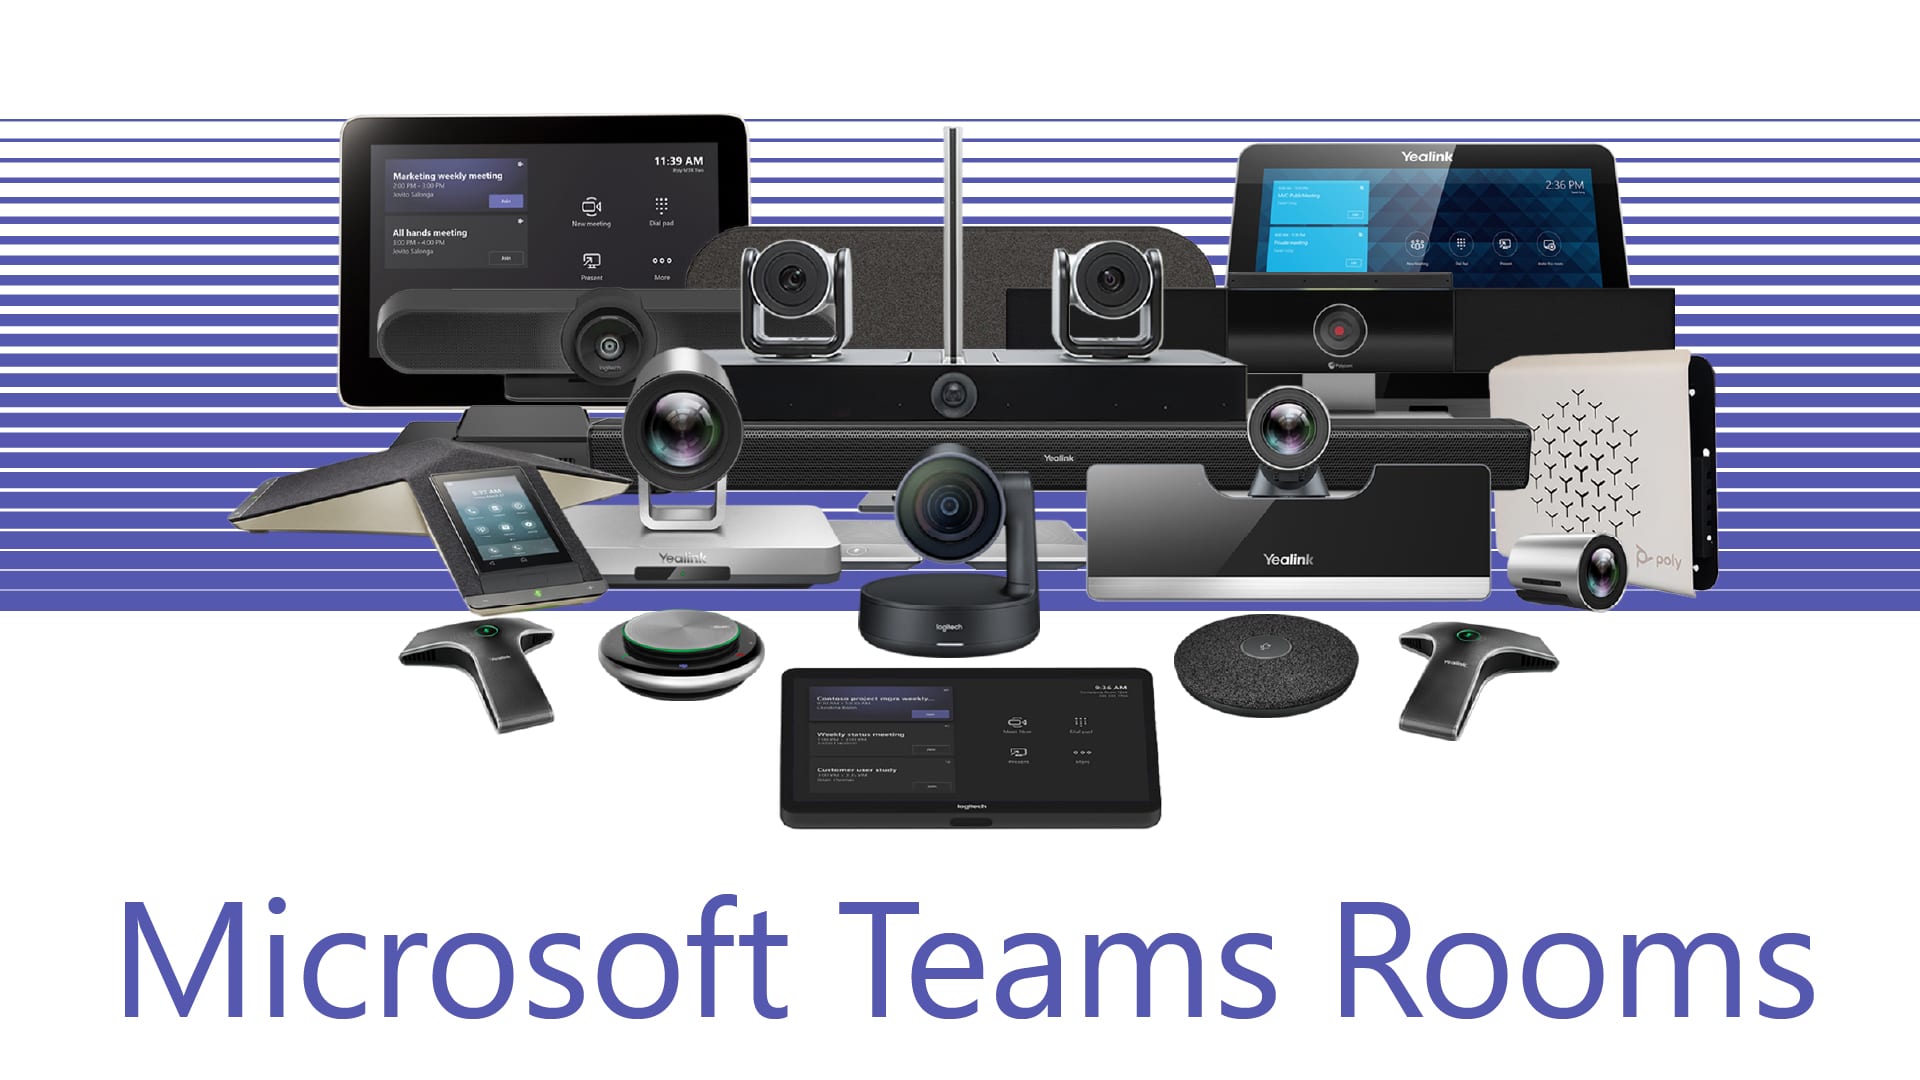 What is a Microsoft Teams Room?